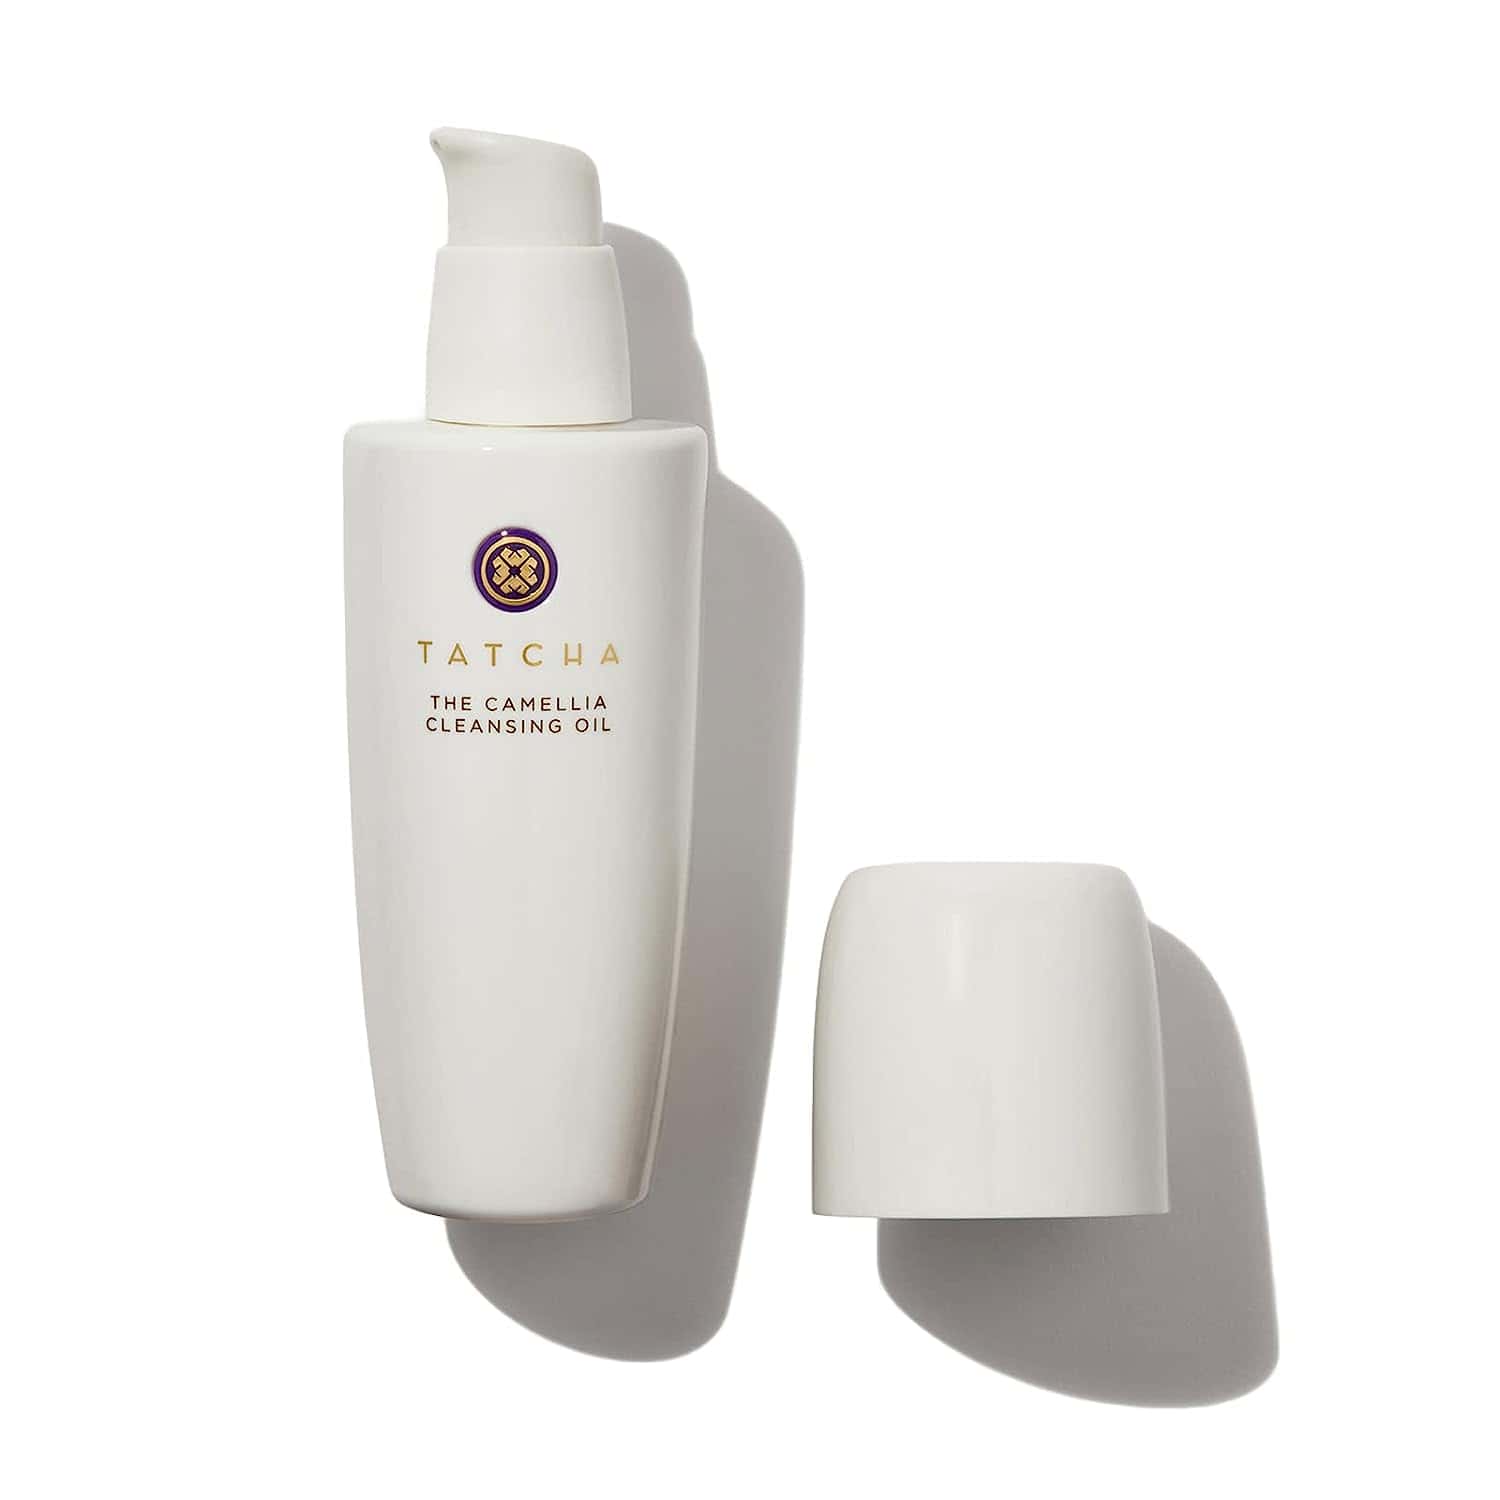 TATCHA Pure One Step Camellia Cleansing Oil